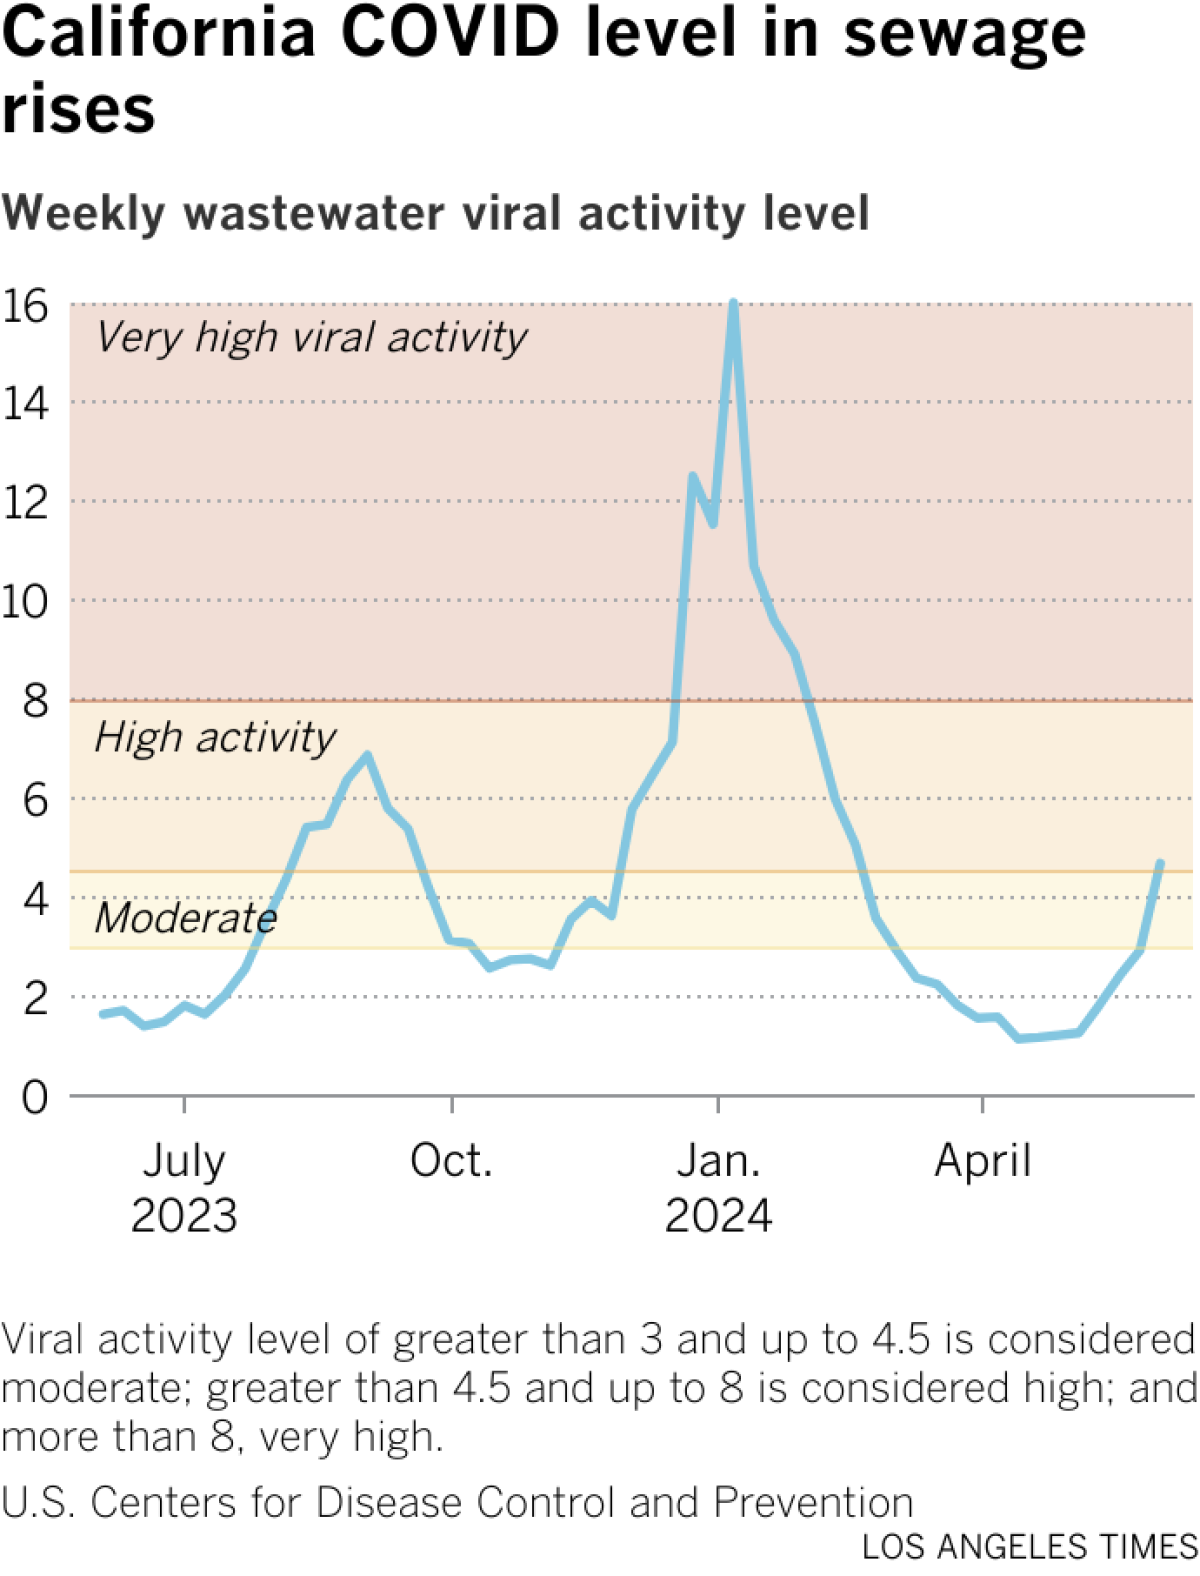 Line chart shows wastewater viral activity has been rising again since May. The last steep spike was in January.